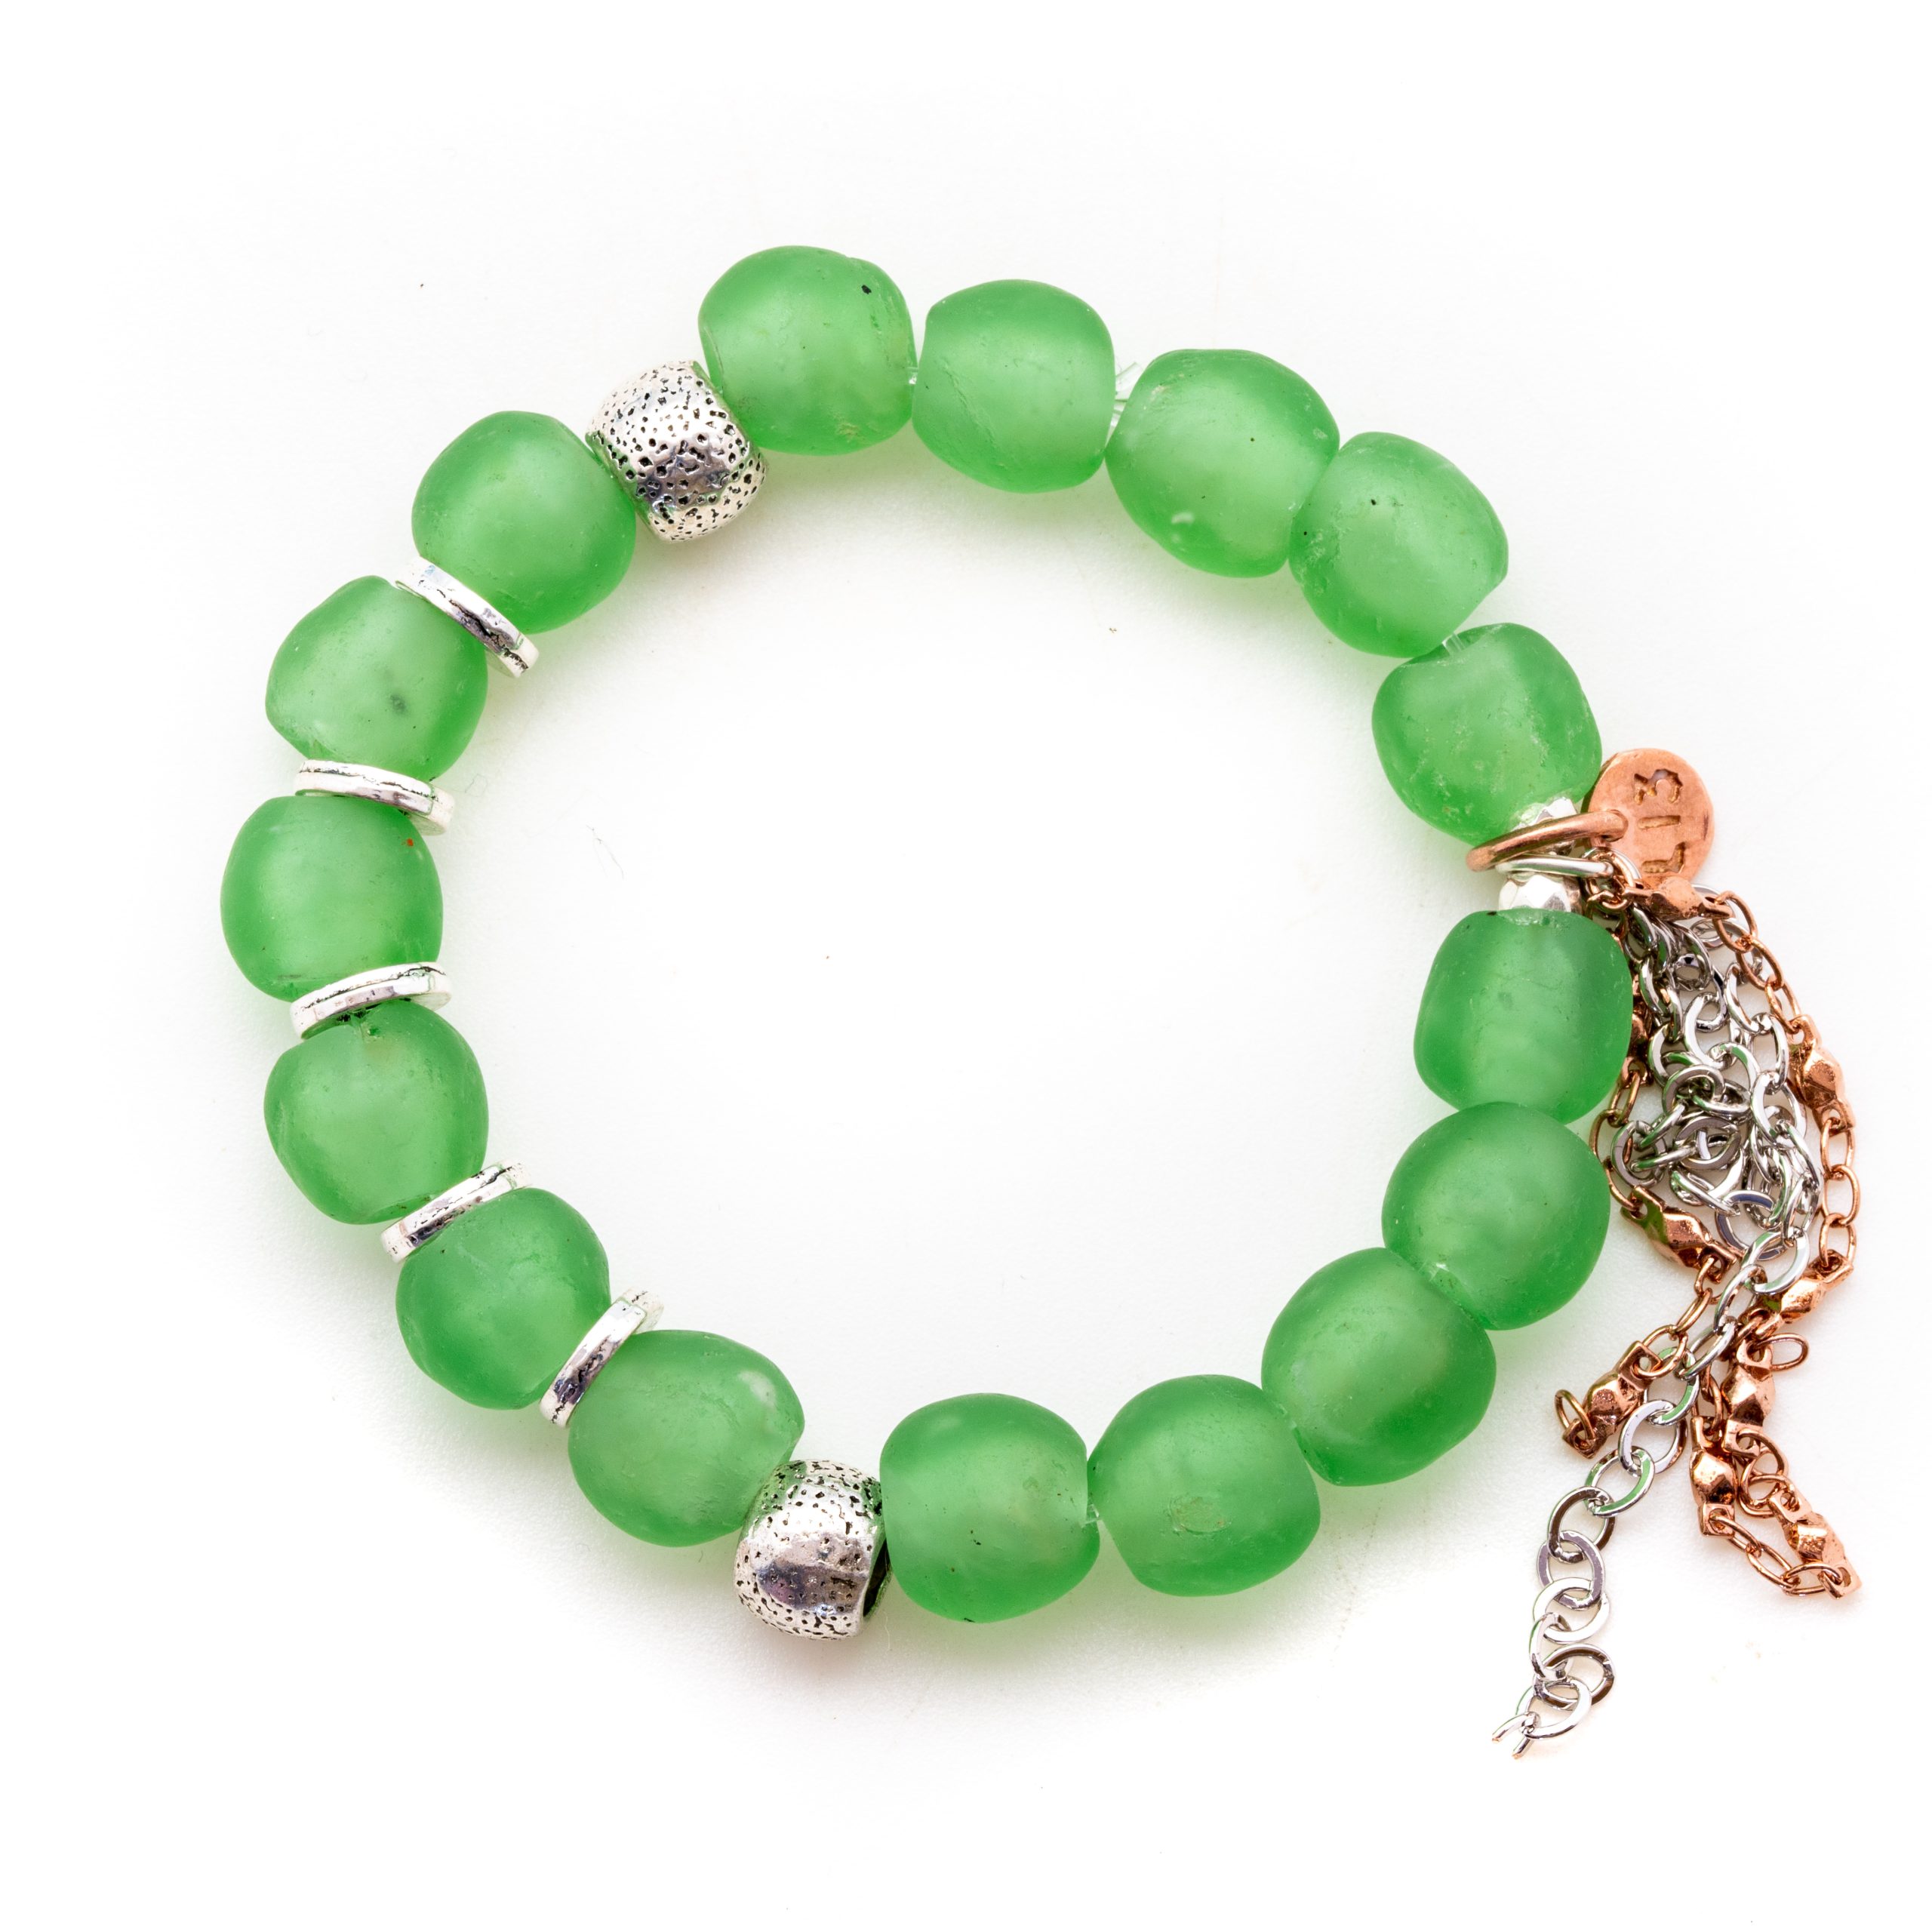 Green Glass & Glam with Tasseling